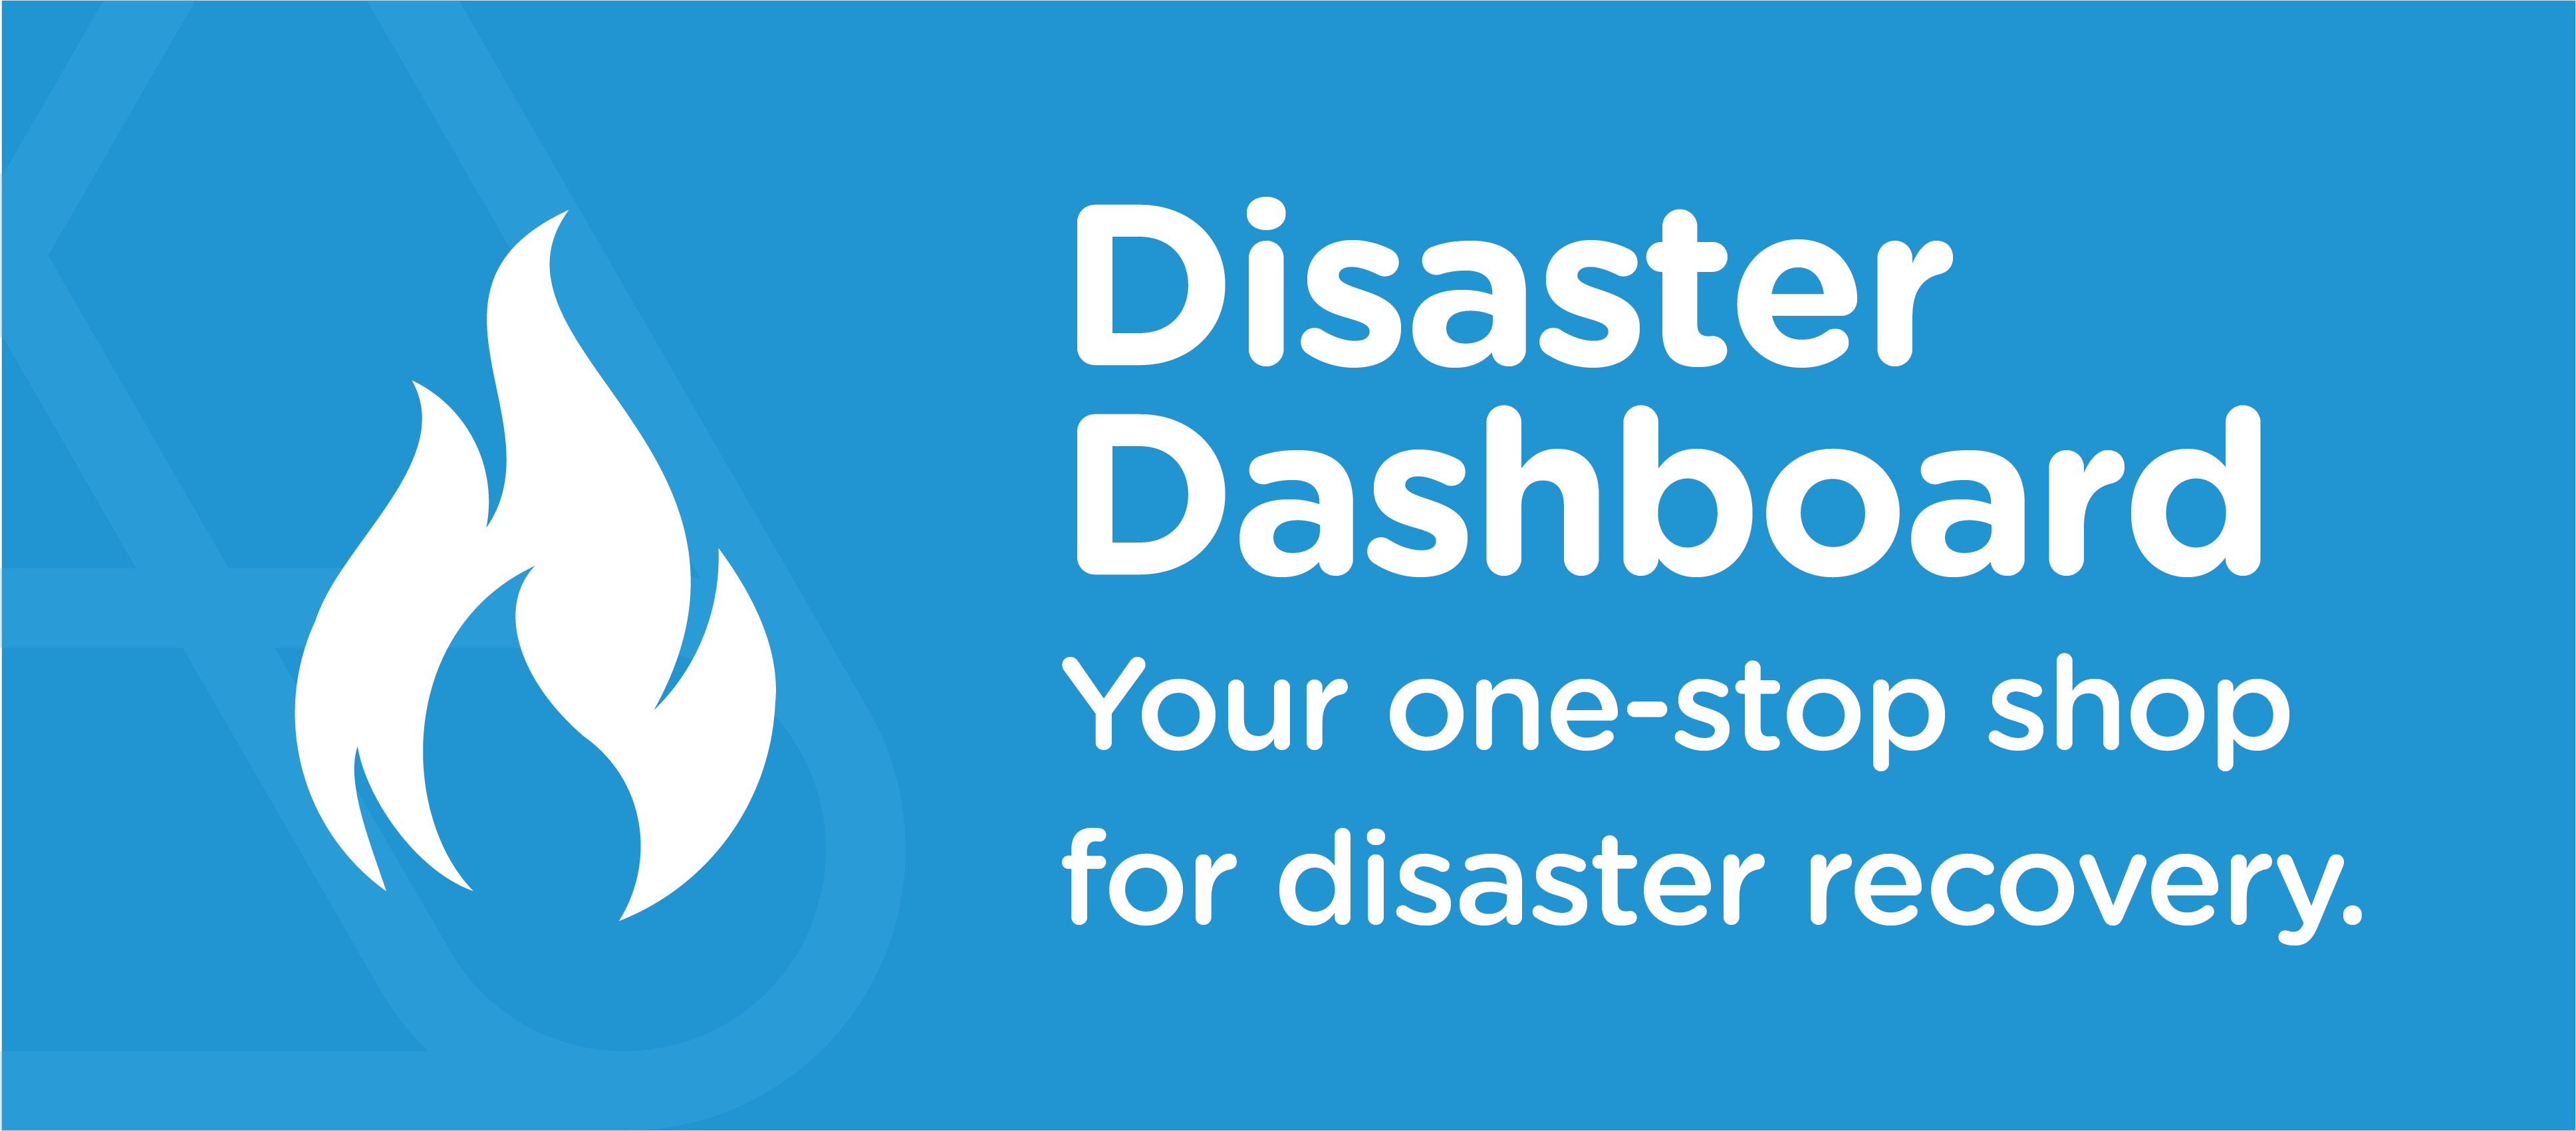 Disaster dashboard quick link 1